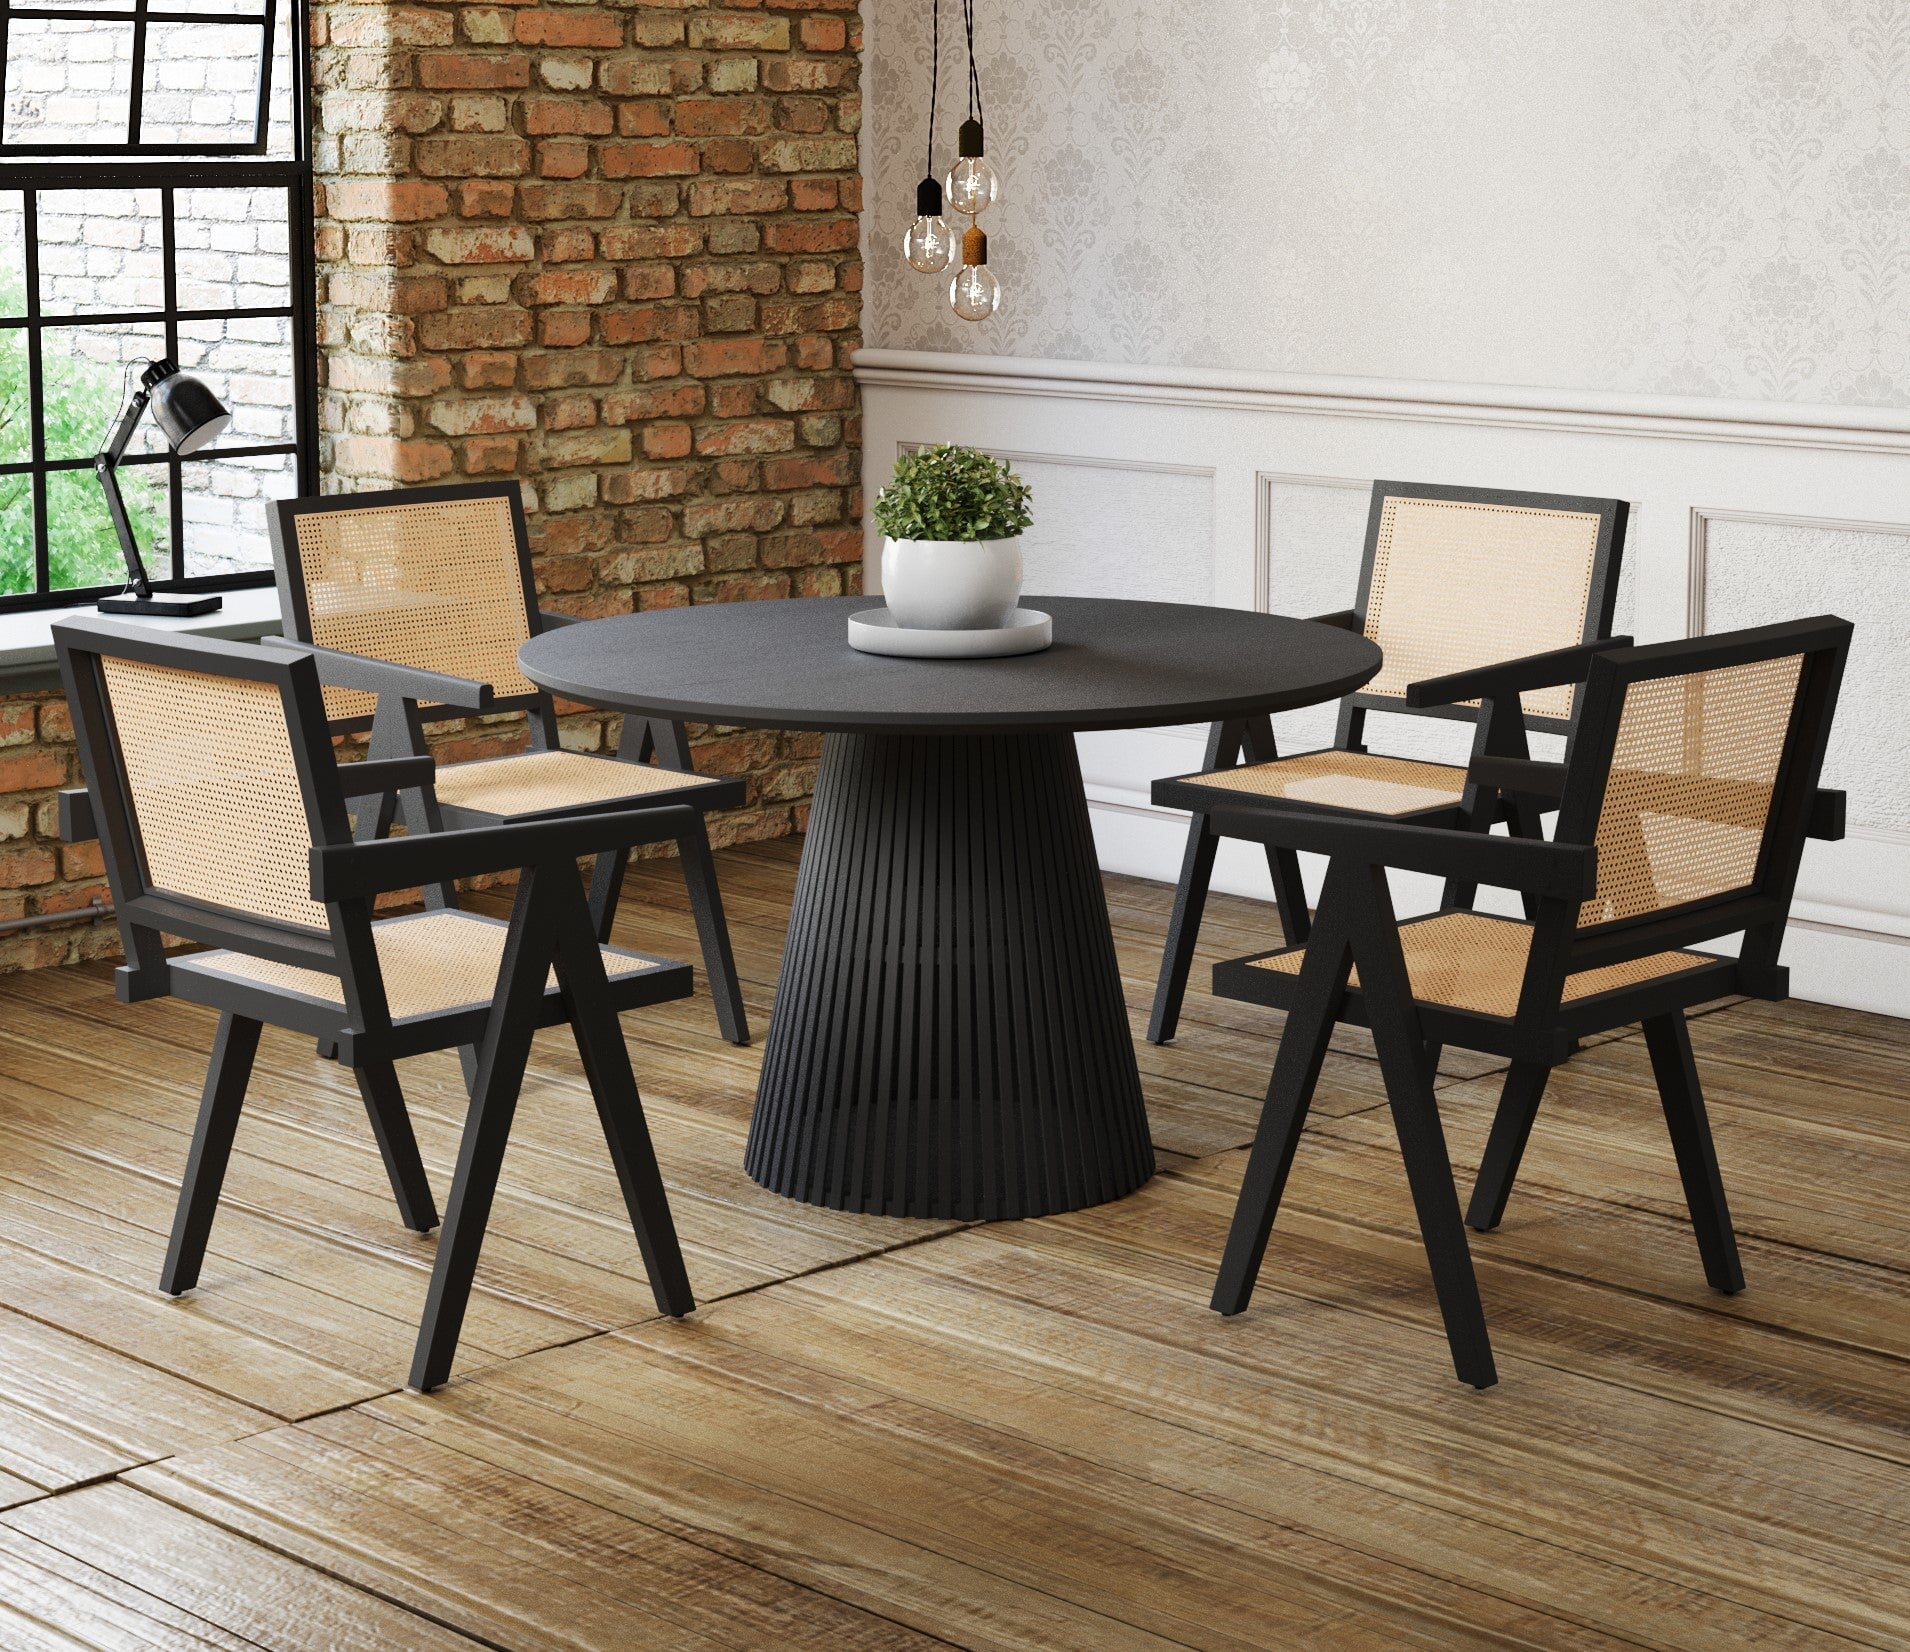 Round Flute Wood Dining Table & 4 x Pierre Jeanneret Chairs Set - Black Acacia Wood Casa Maria Designs 